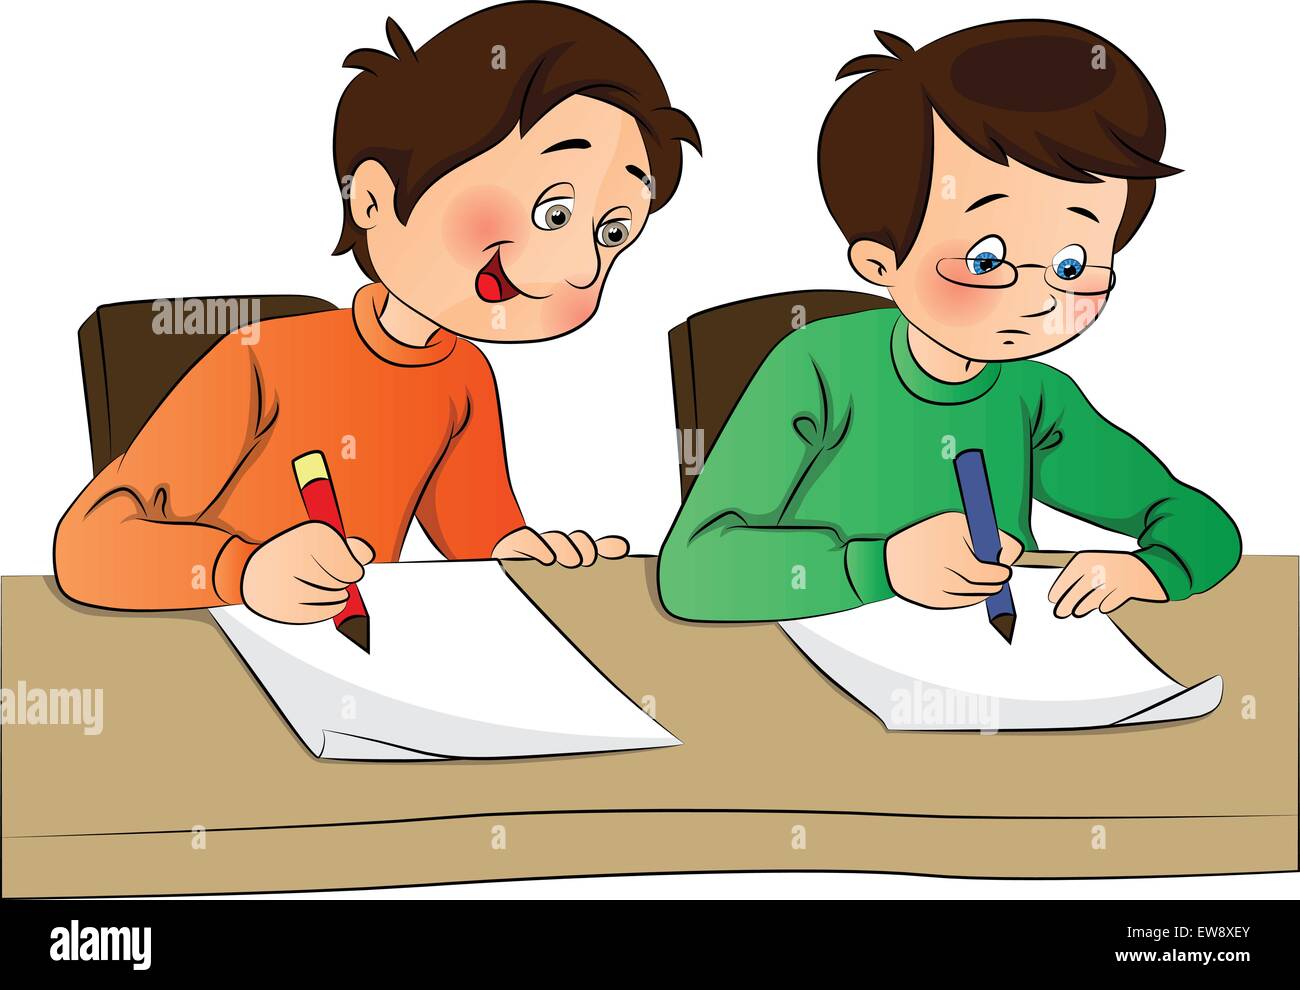 Vector illustration of boy copying from other student's paper during examination. Stock Vector